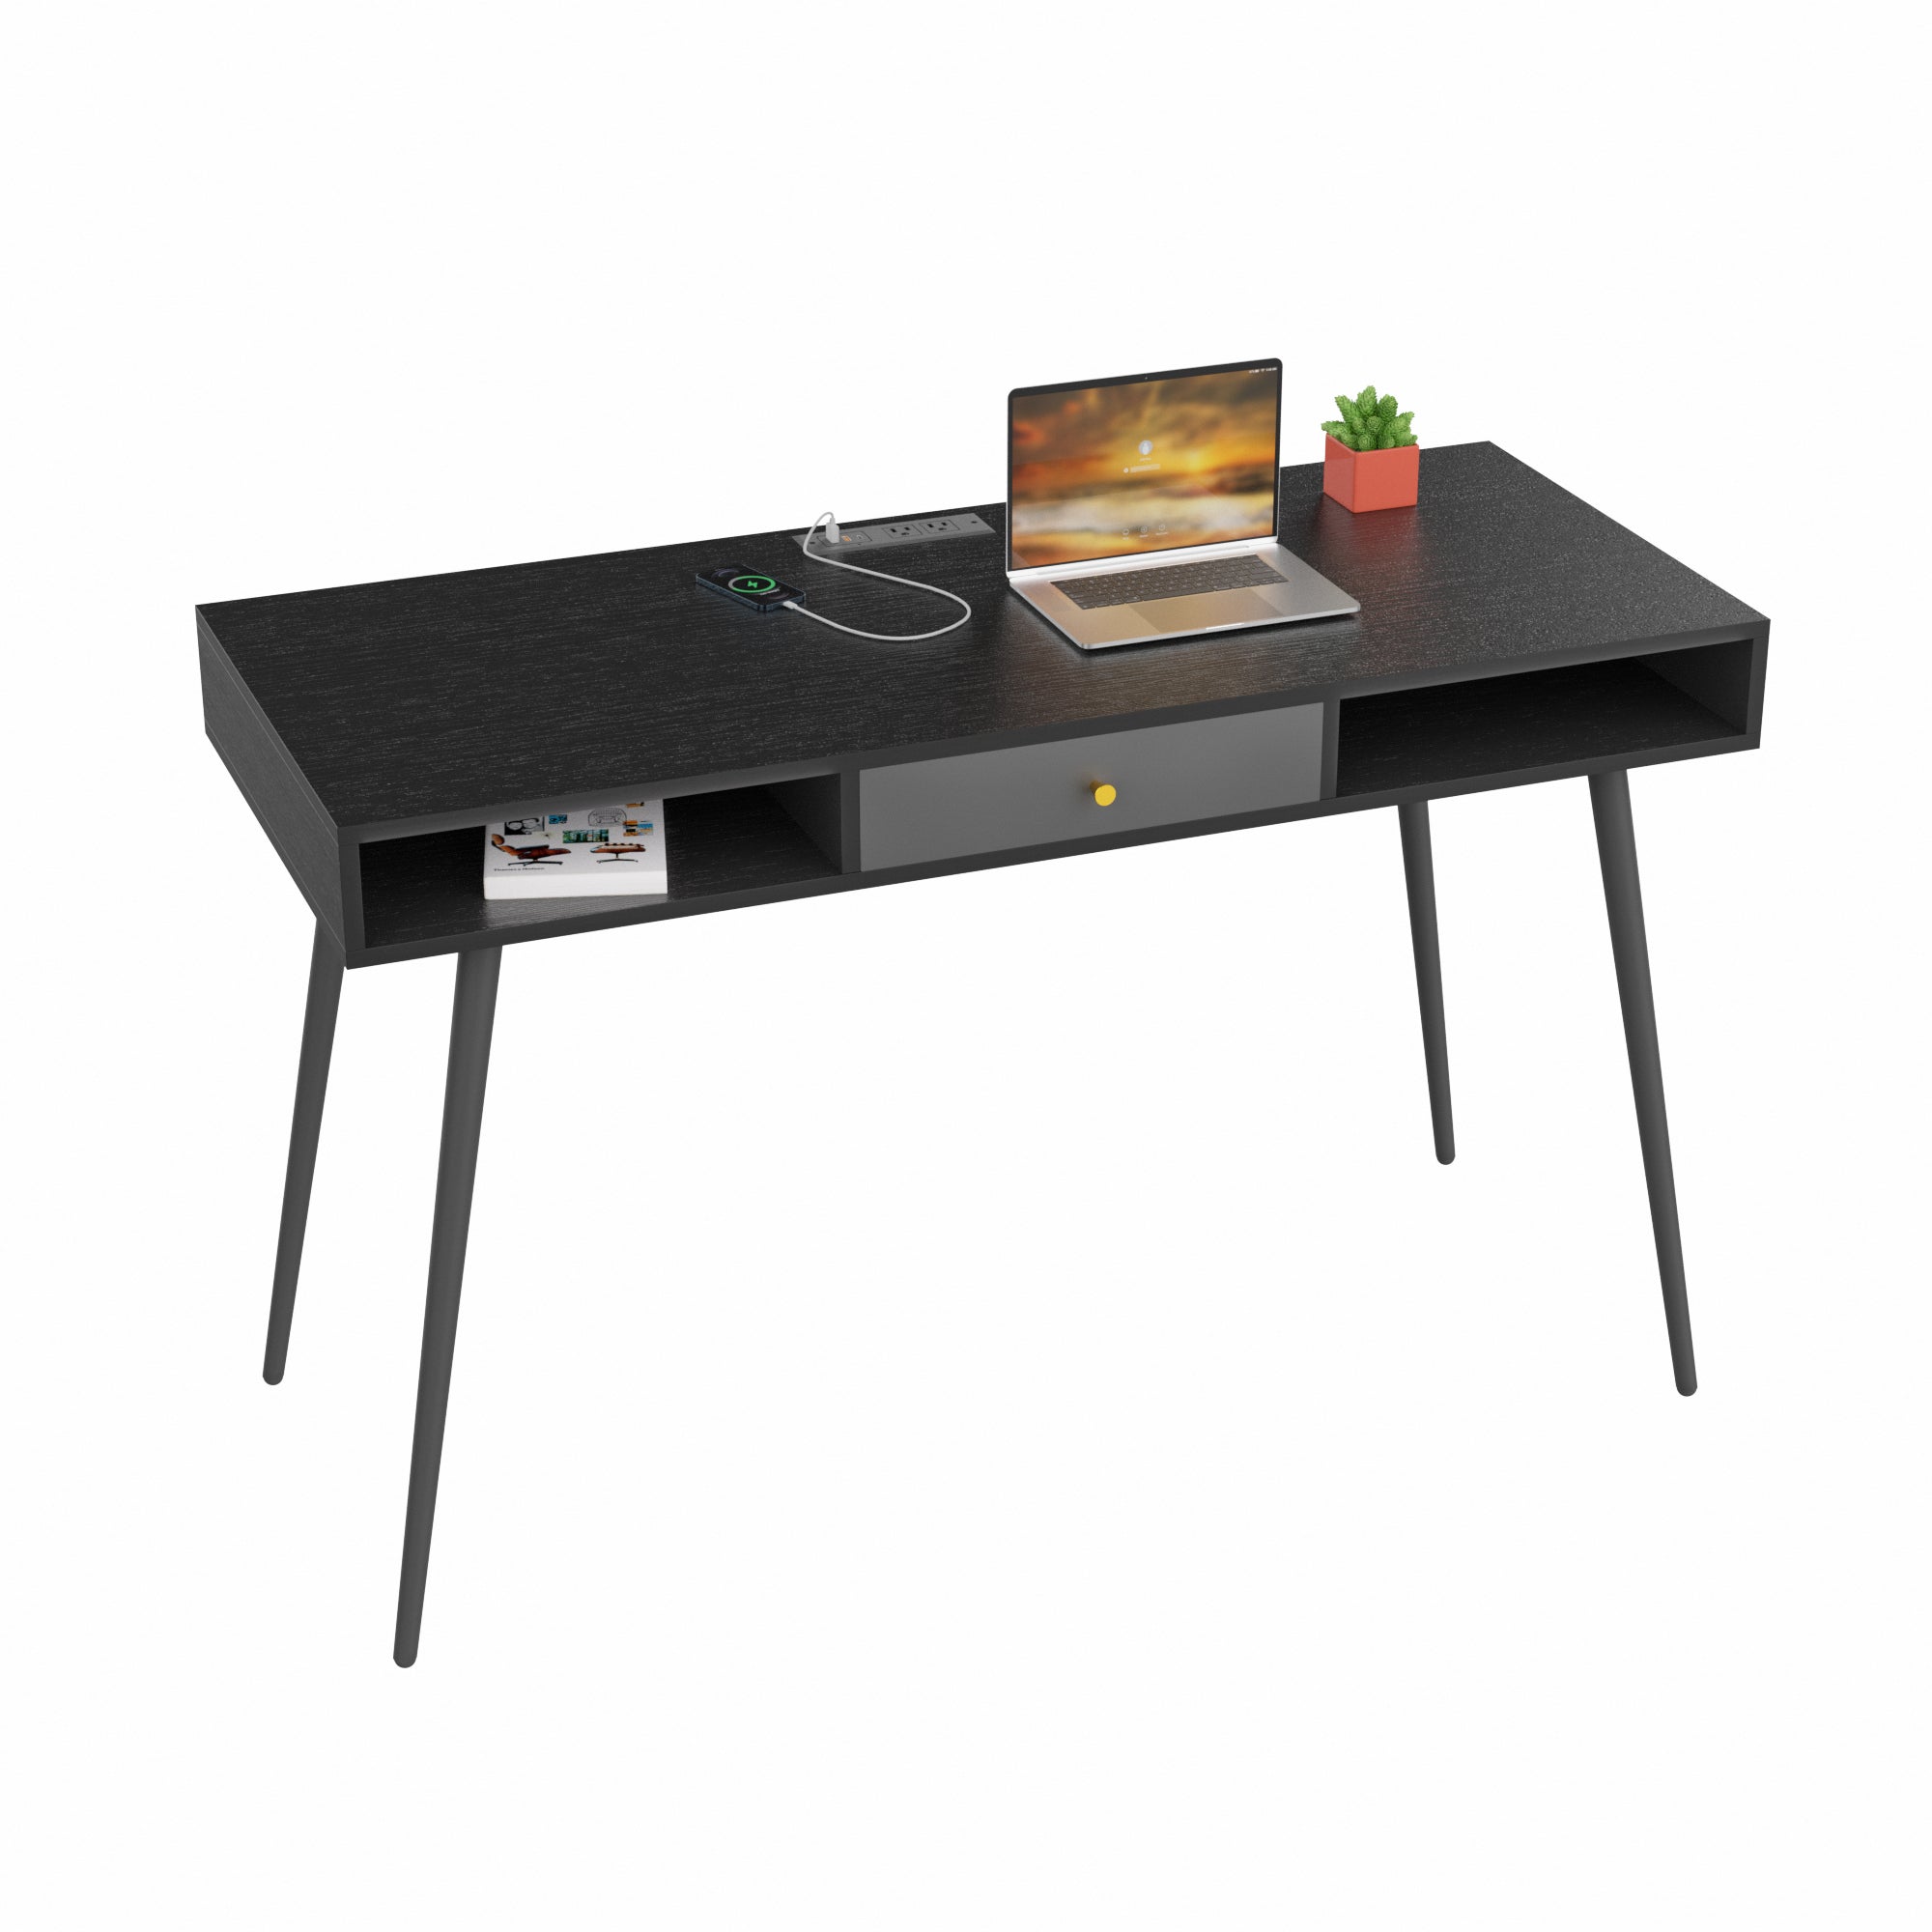 ZNTS Mid Century Desk with USB Ports and Power Outlet, Modern Writing Study Desk with Drawers, W87649728